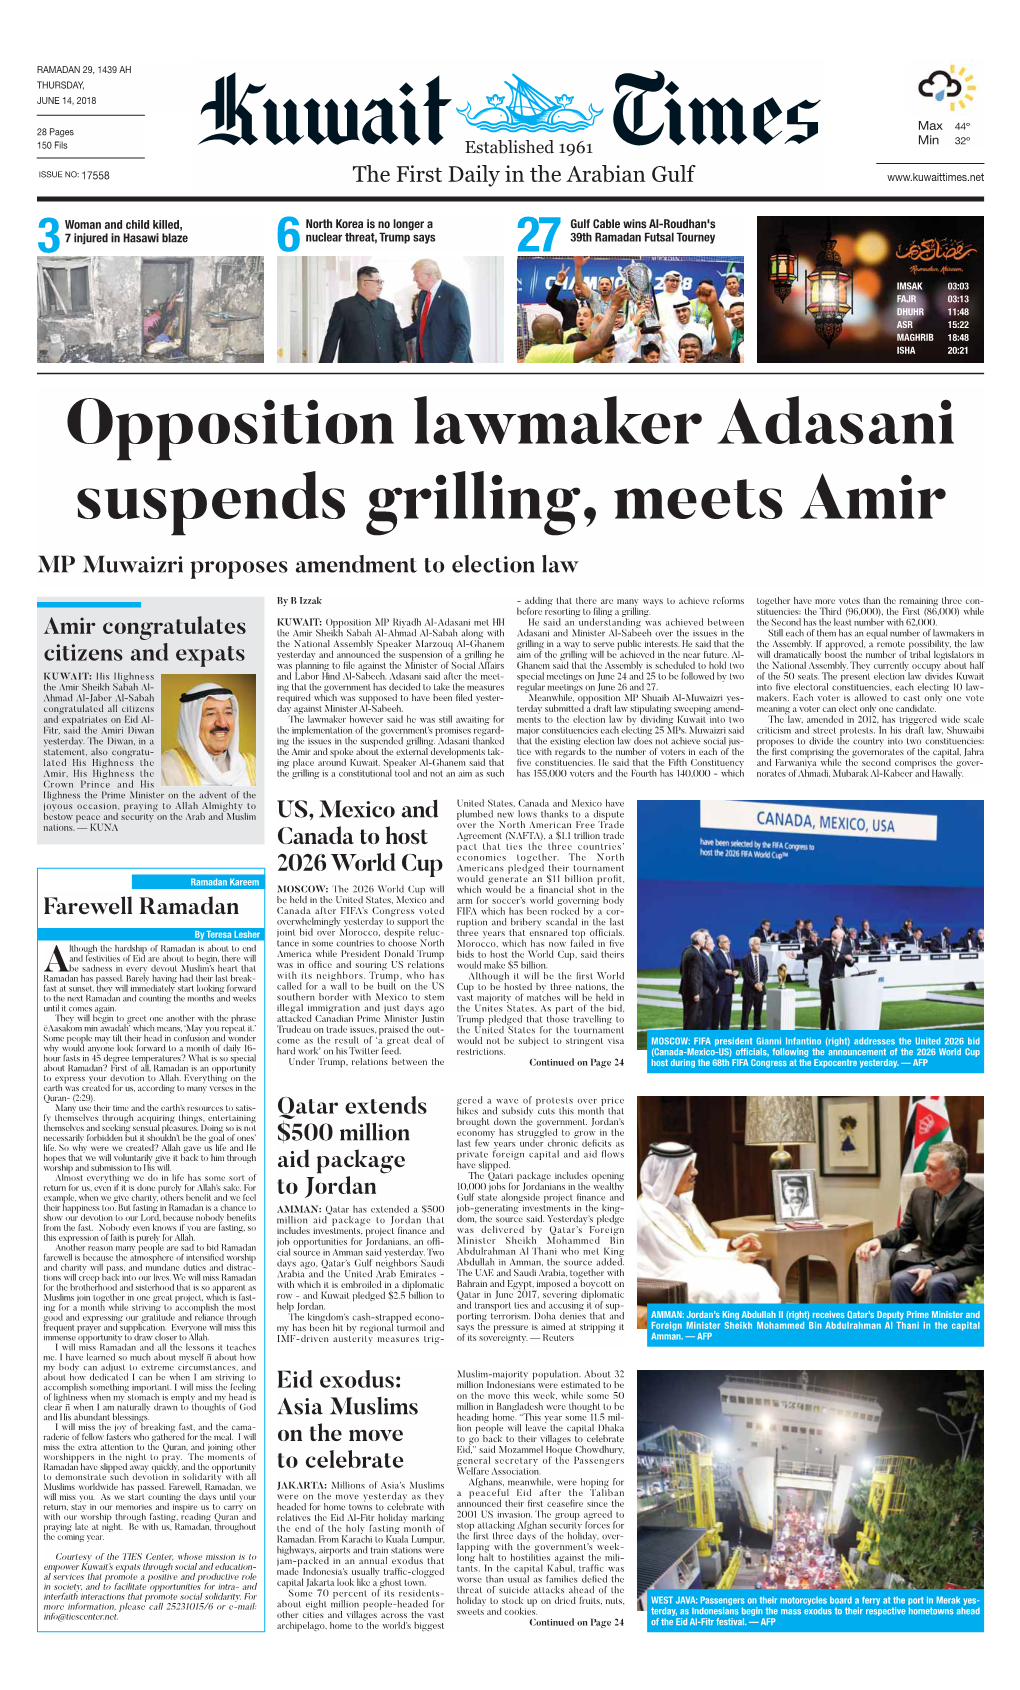 Opposition Lawmaker Adasani Suspends Grilling, Meets Amir MP Muwaizri Proposes Amendment to Election Law